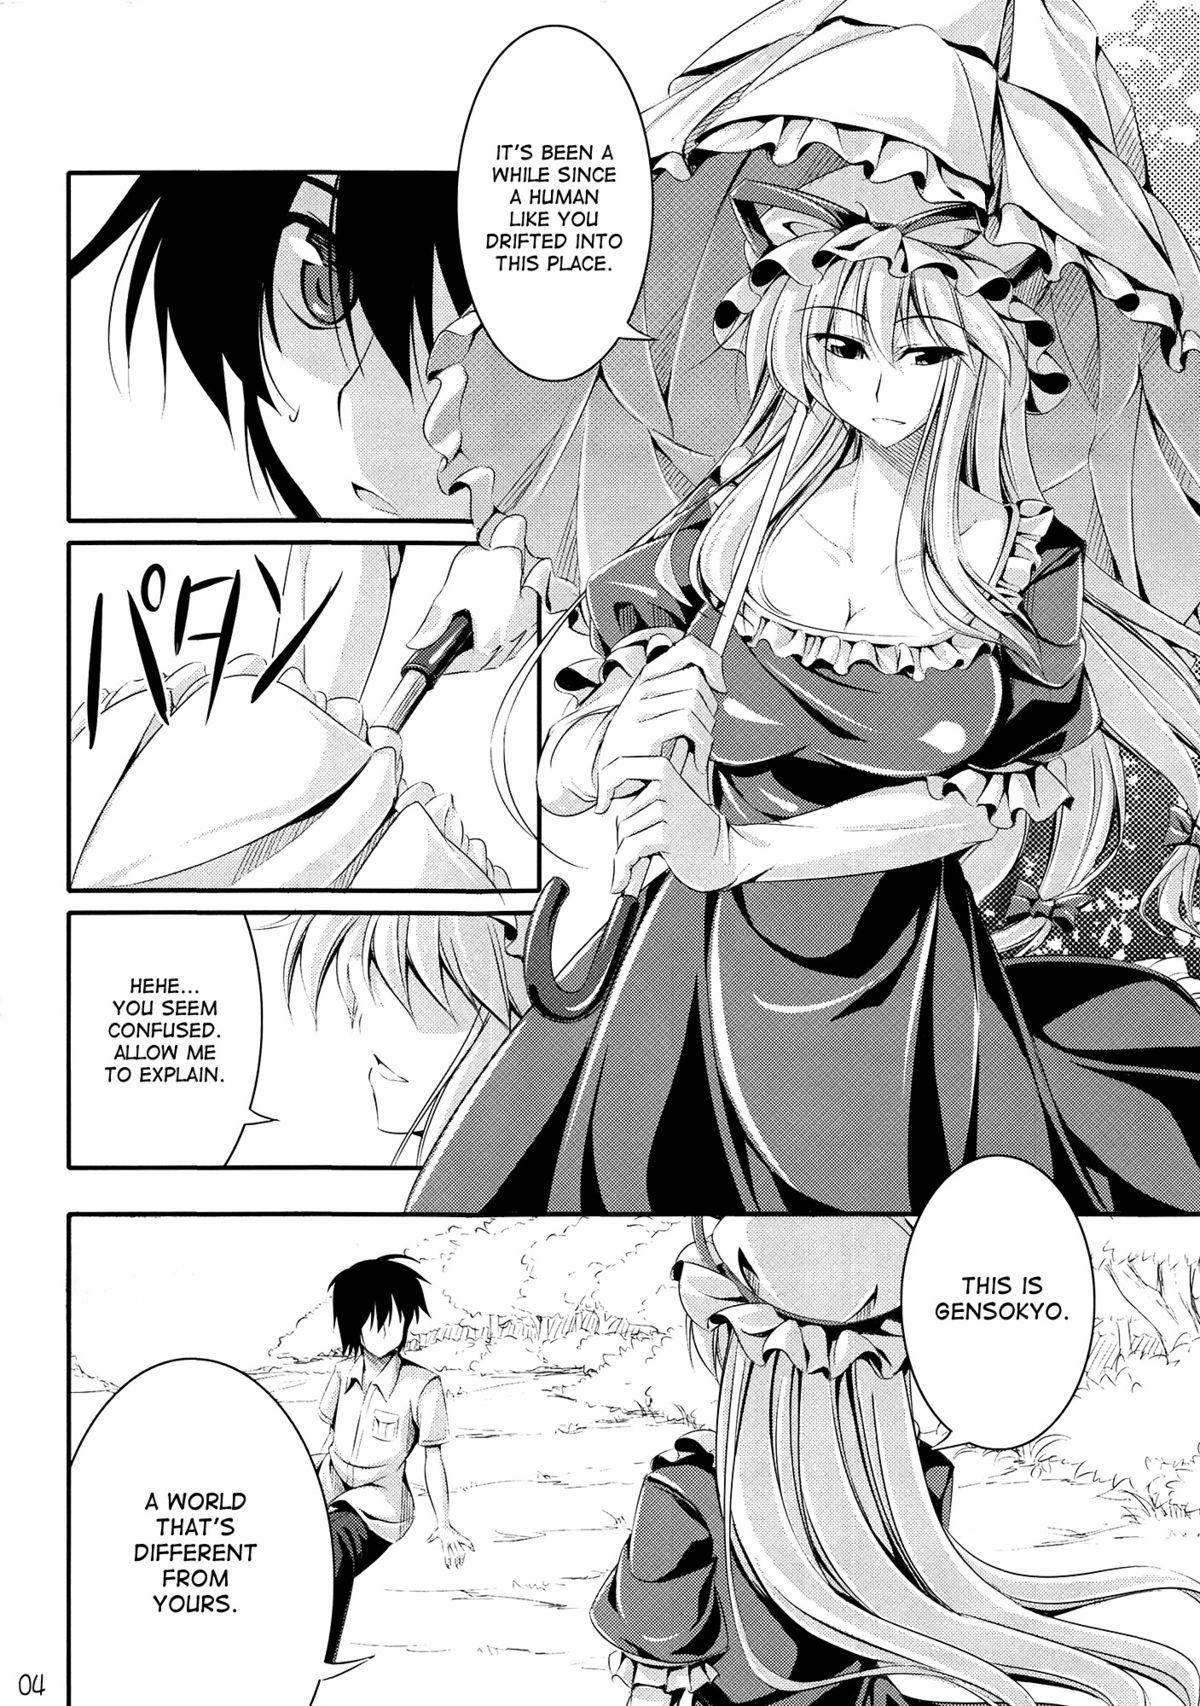 Cuckolding Welcome to Wonder World - Touhou project Gay Physicals - Page 3